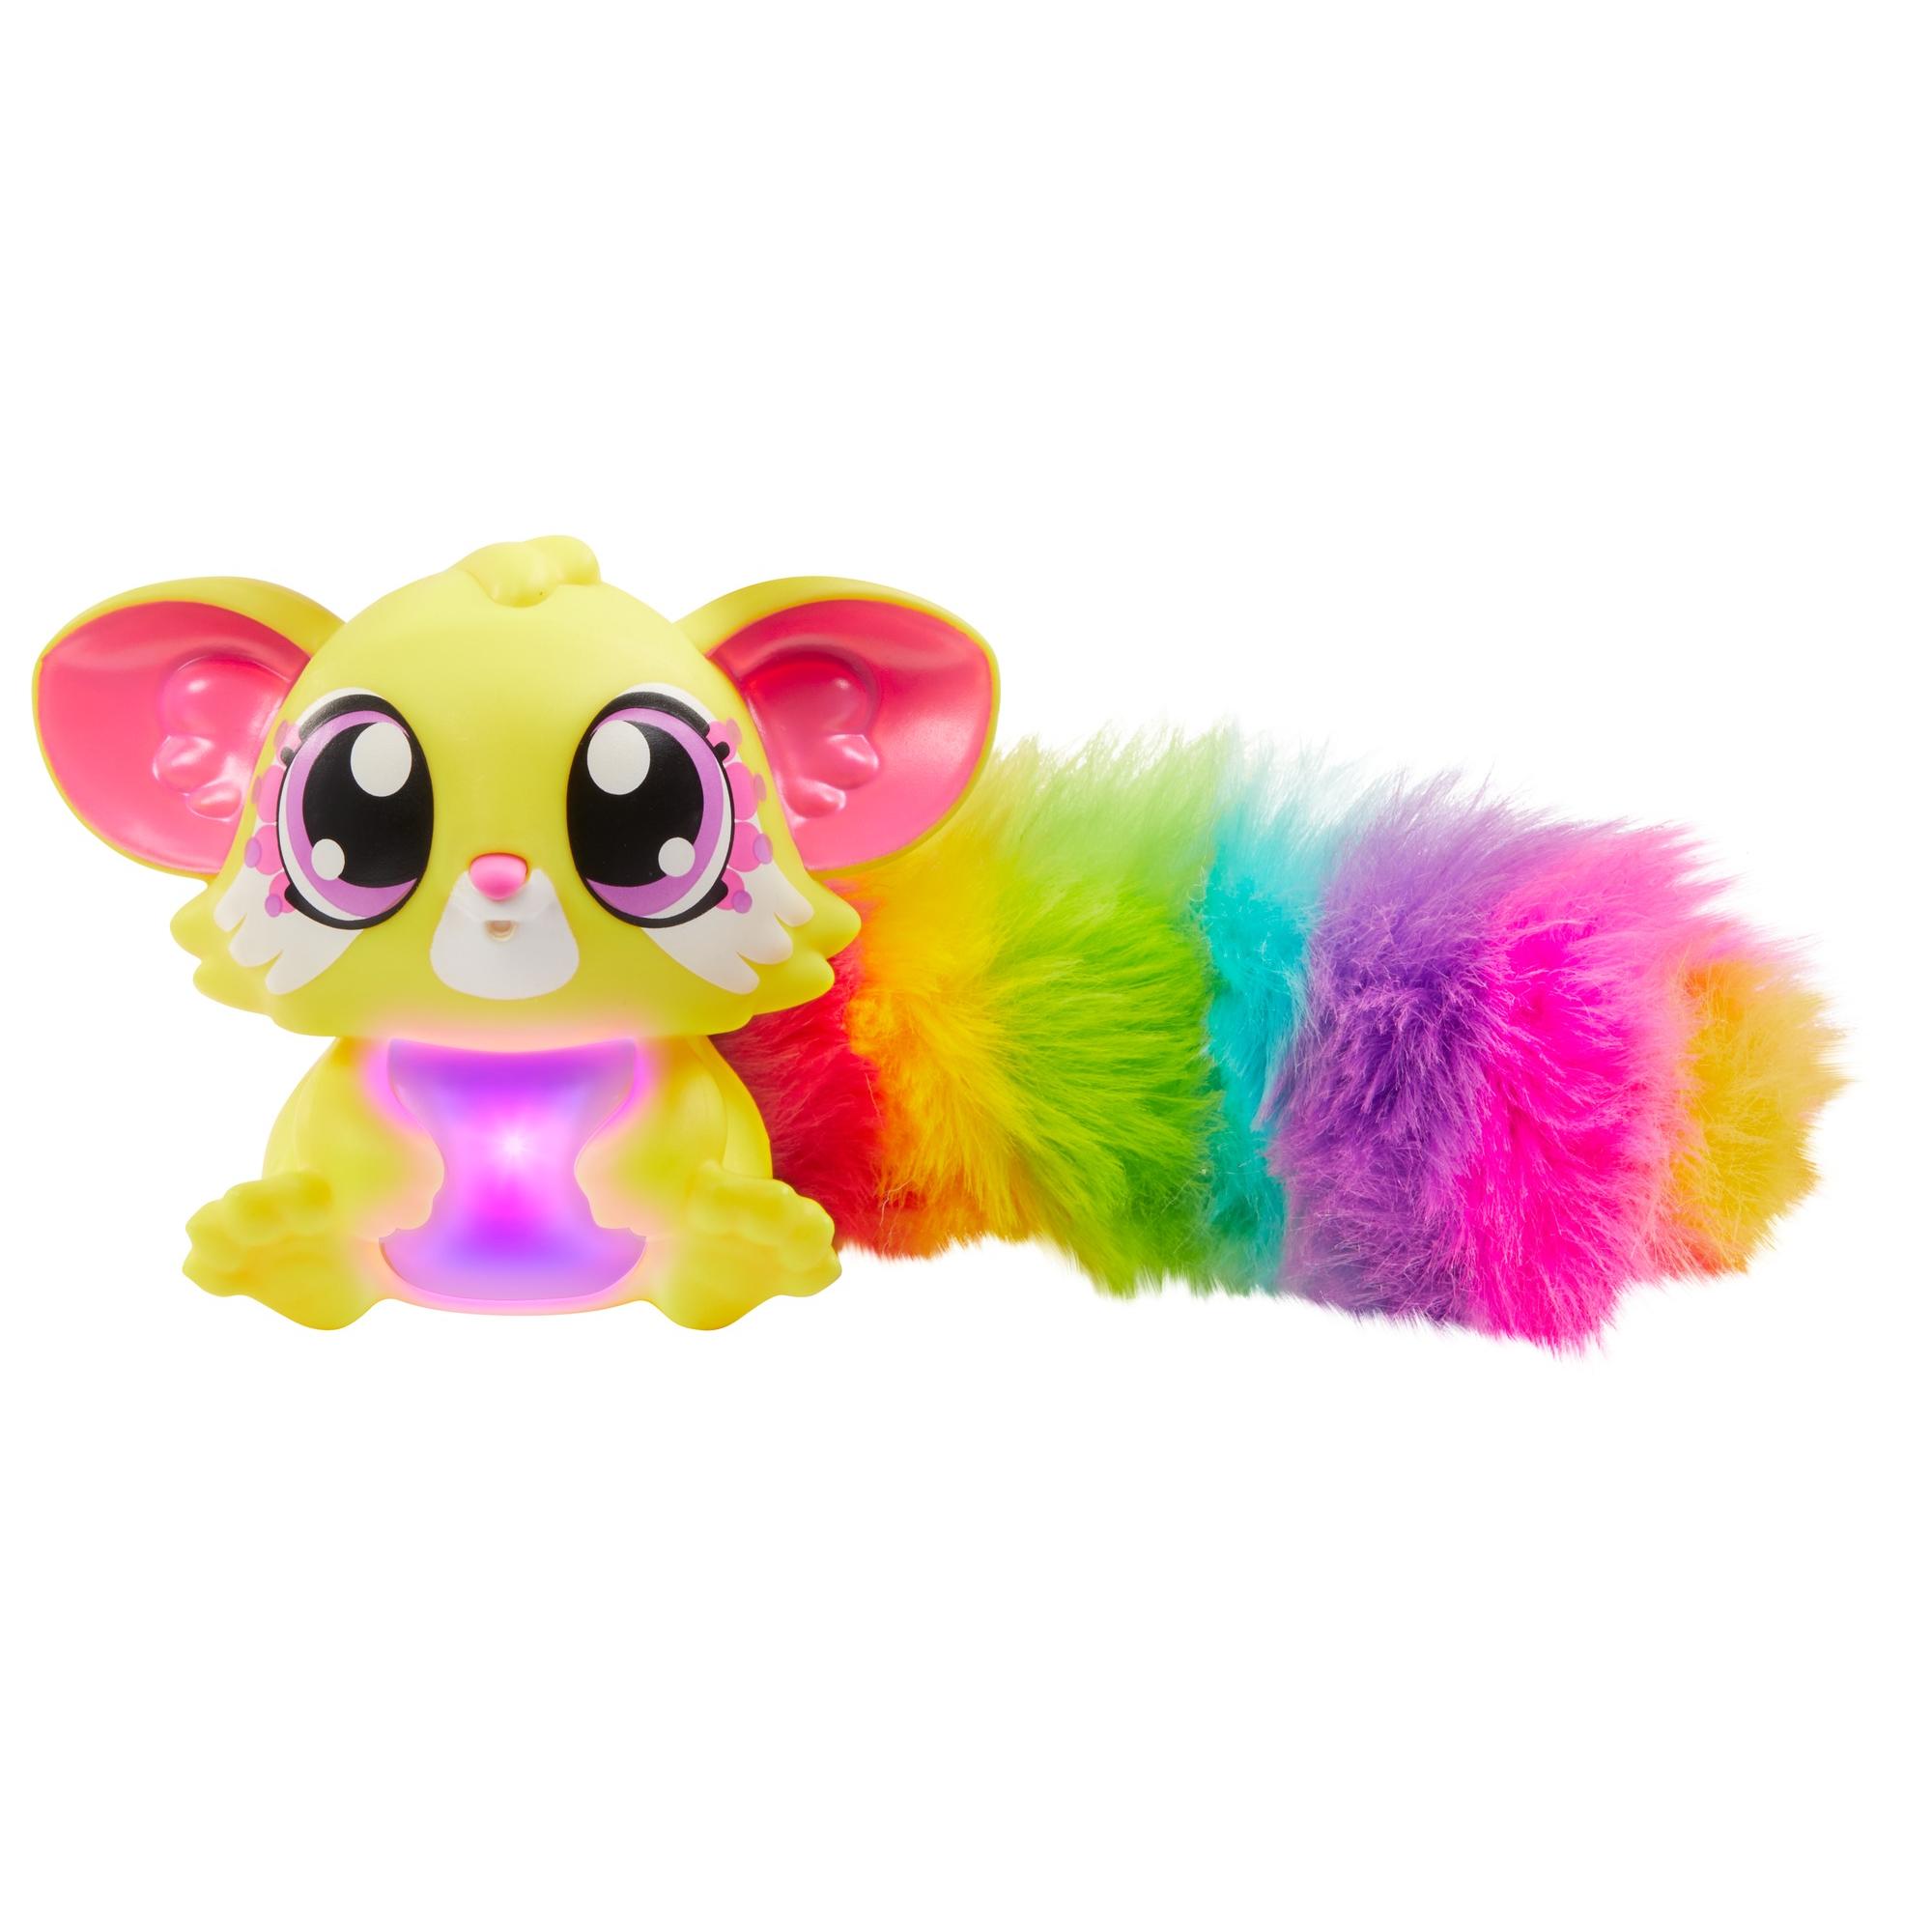 Lil' Gleemerz Babies Interactive Light-Up Figure (Styles May Vary) - image 1 of 18